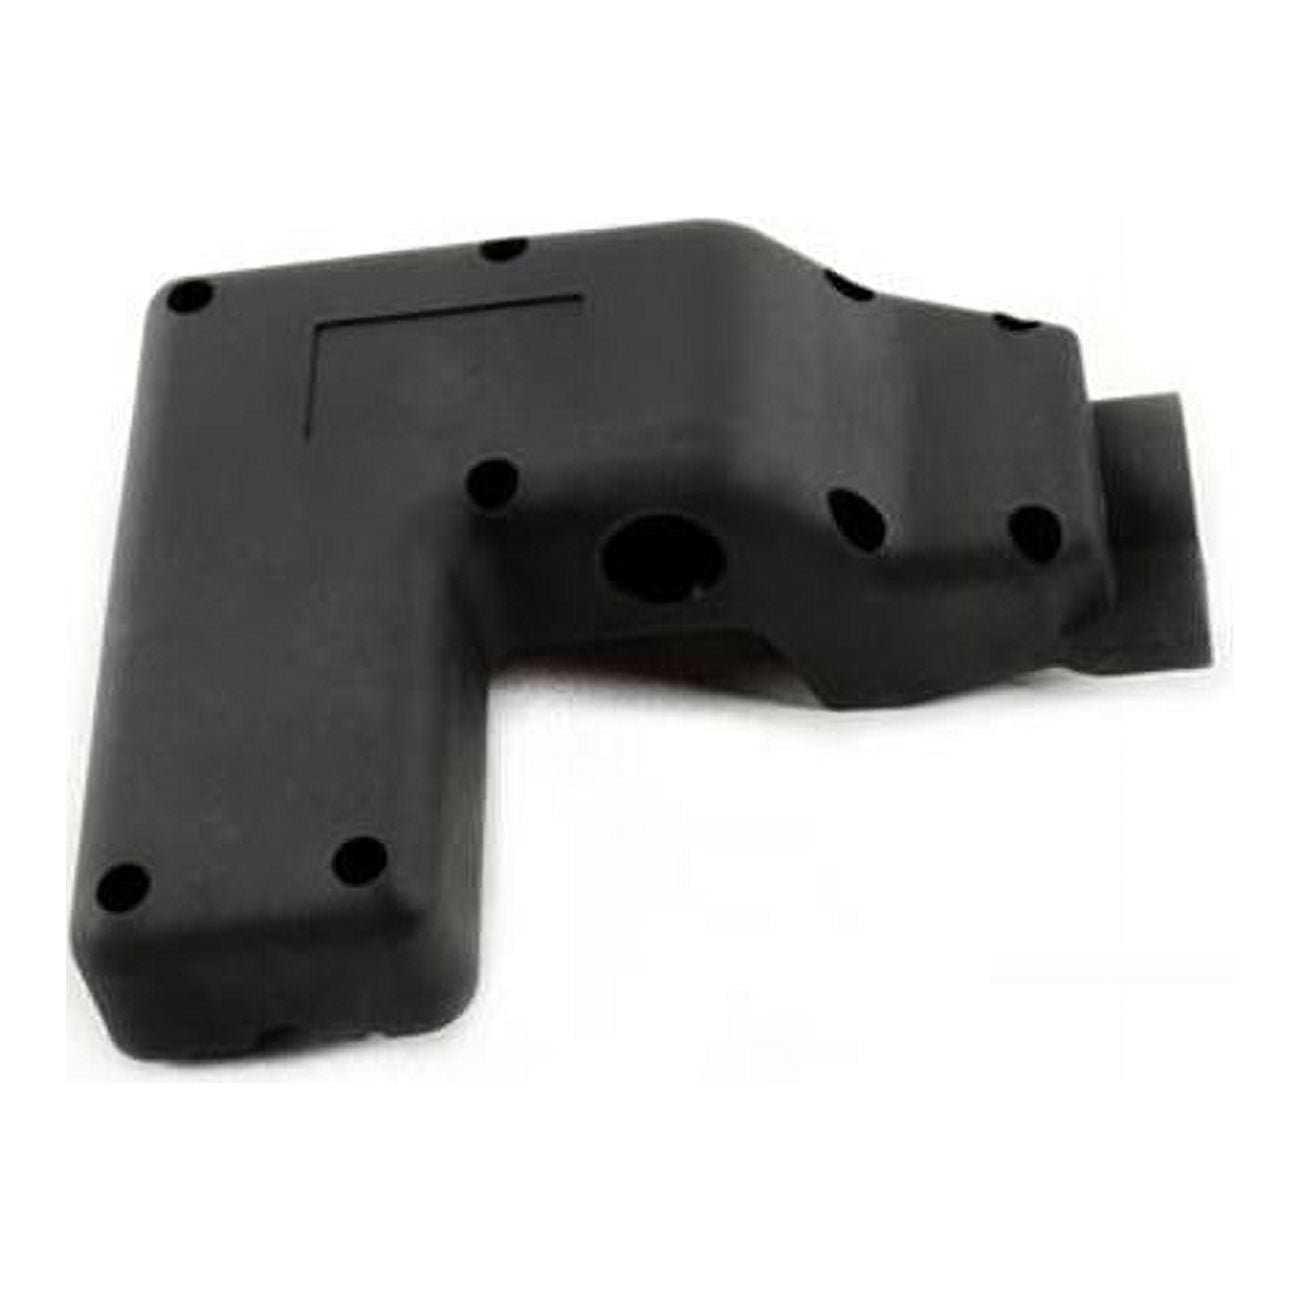 Picture of Aleko HLFAS600-1200-UNB Left Housing Front Part for AS600 & AS1200 Swing Gate Opener